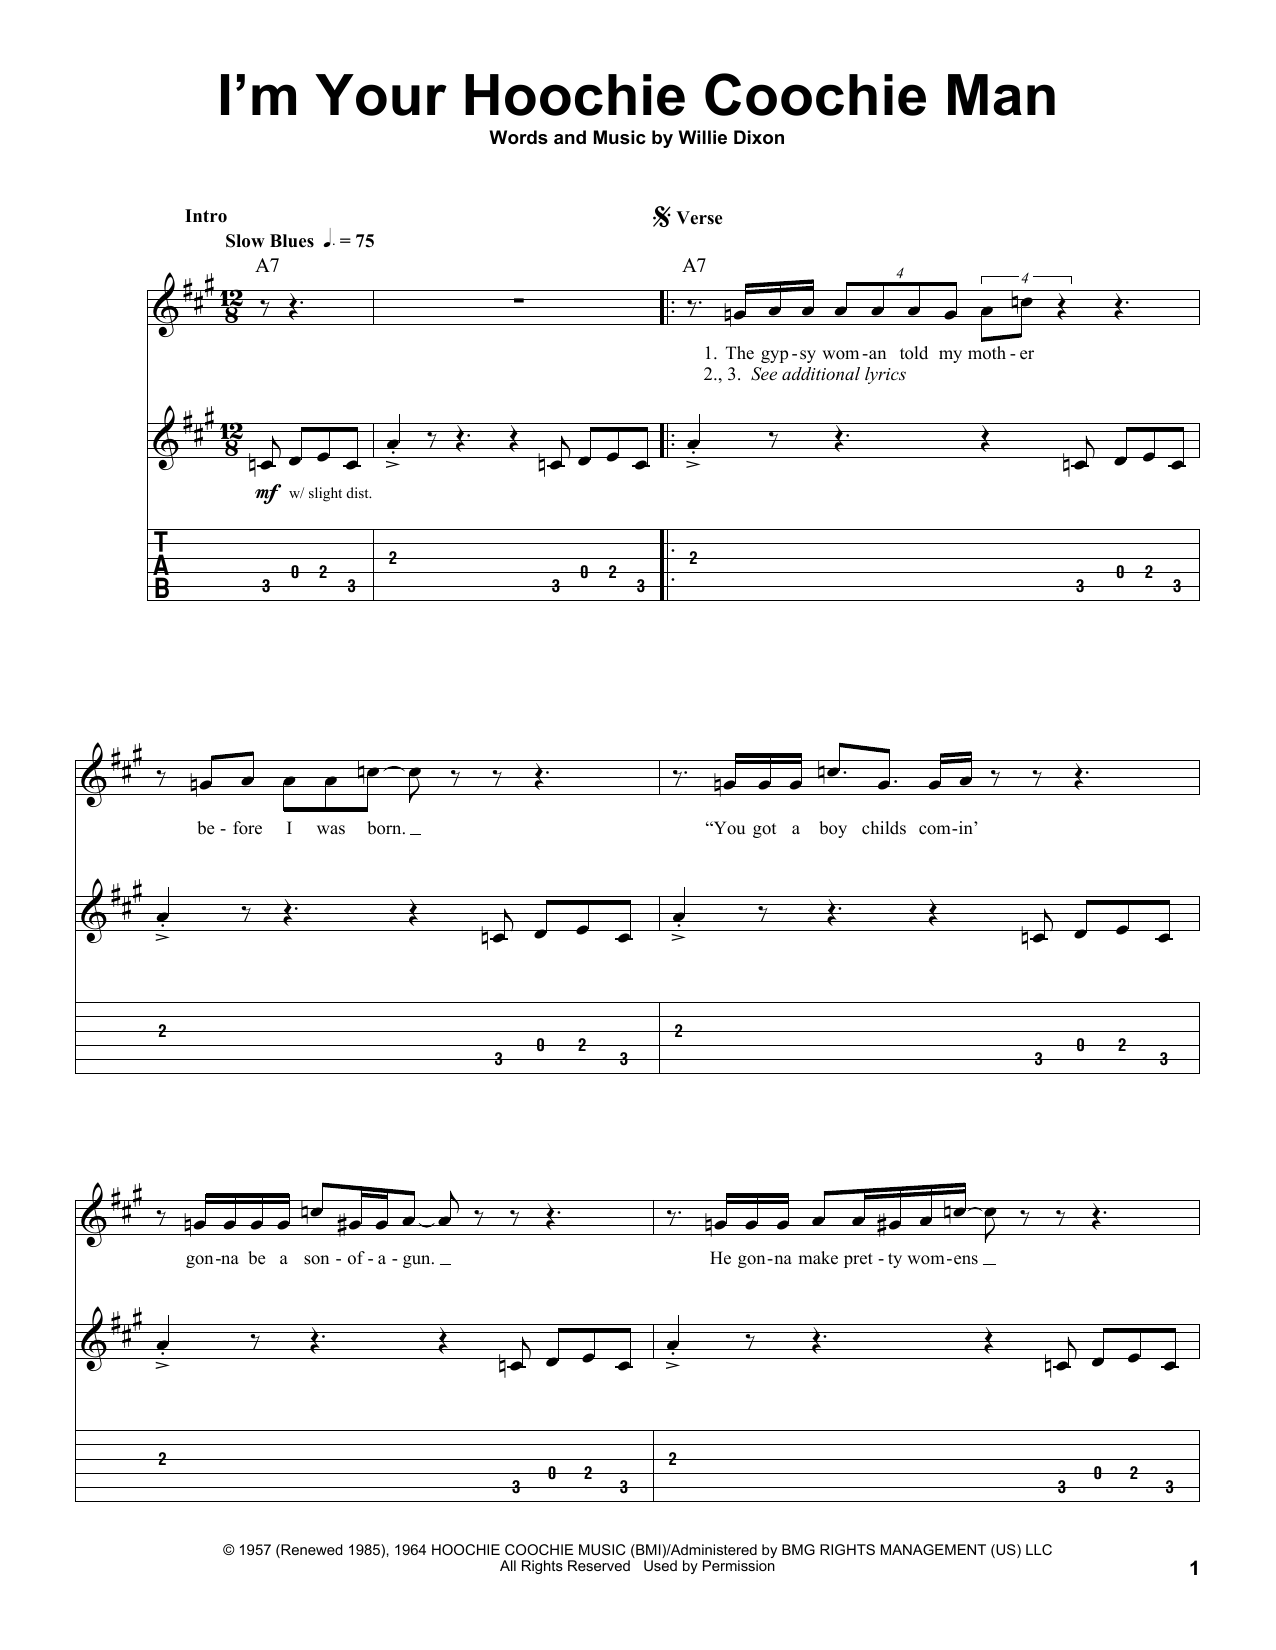 Muddy Waters I'm Your Hoochie Coochie Man sheet music notes and chords. Download Printable PDF.